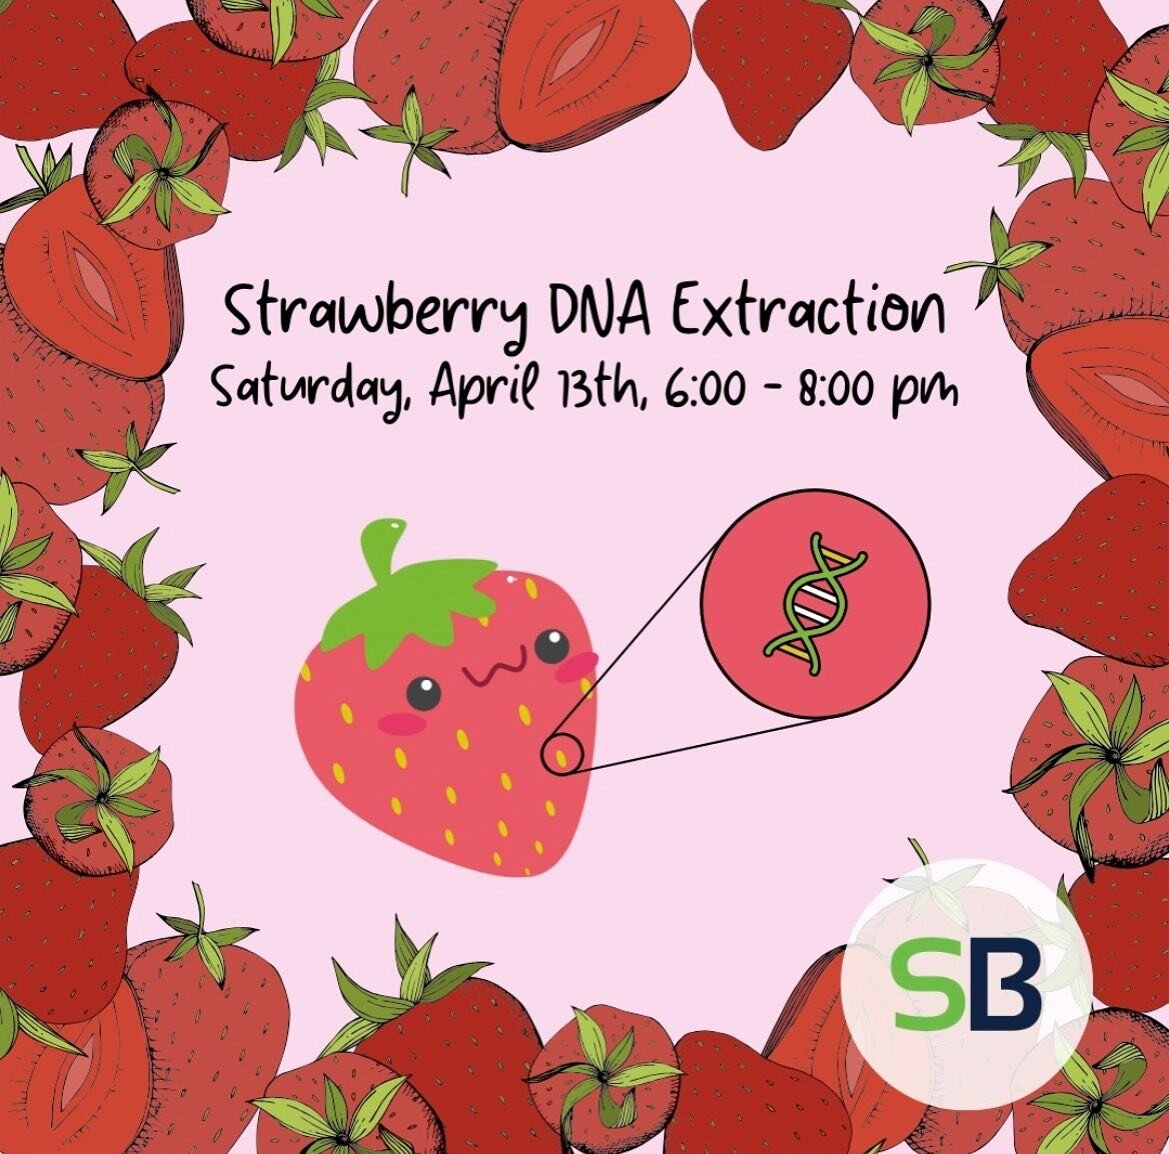 REMINDER: Check out this workshop next Saturday in our bio-tech lab for a fun strawberry DNA  extraction opportunity! #lab #dnaextraction #fun